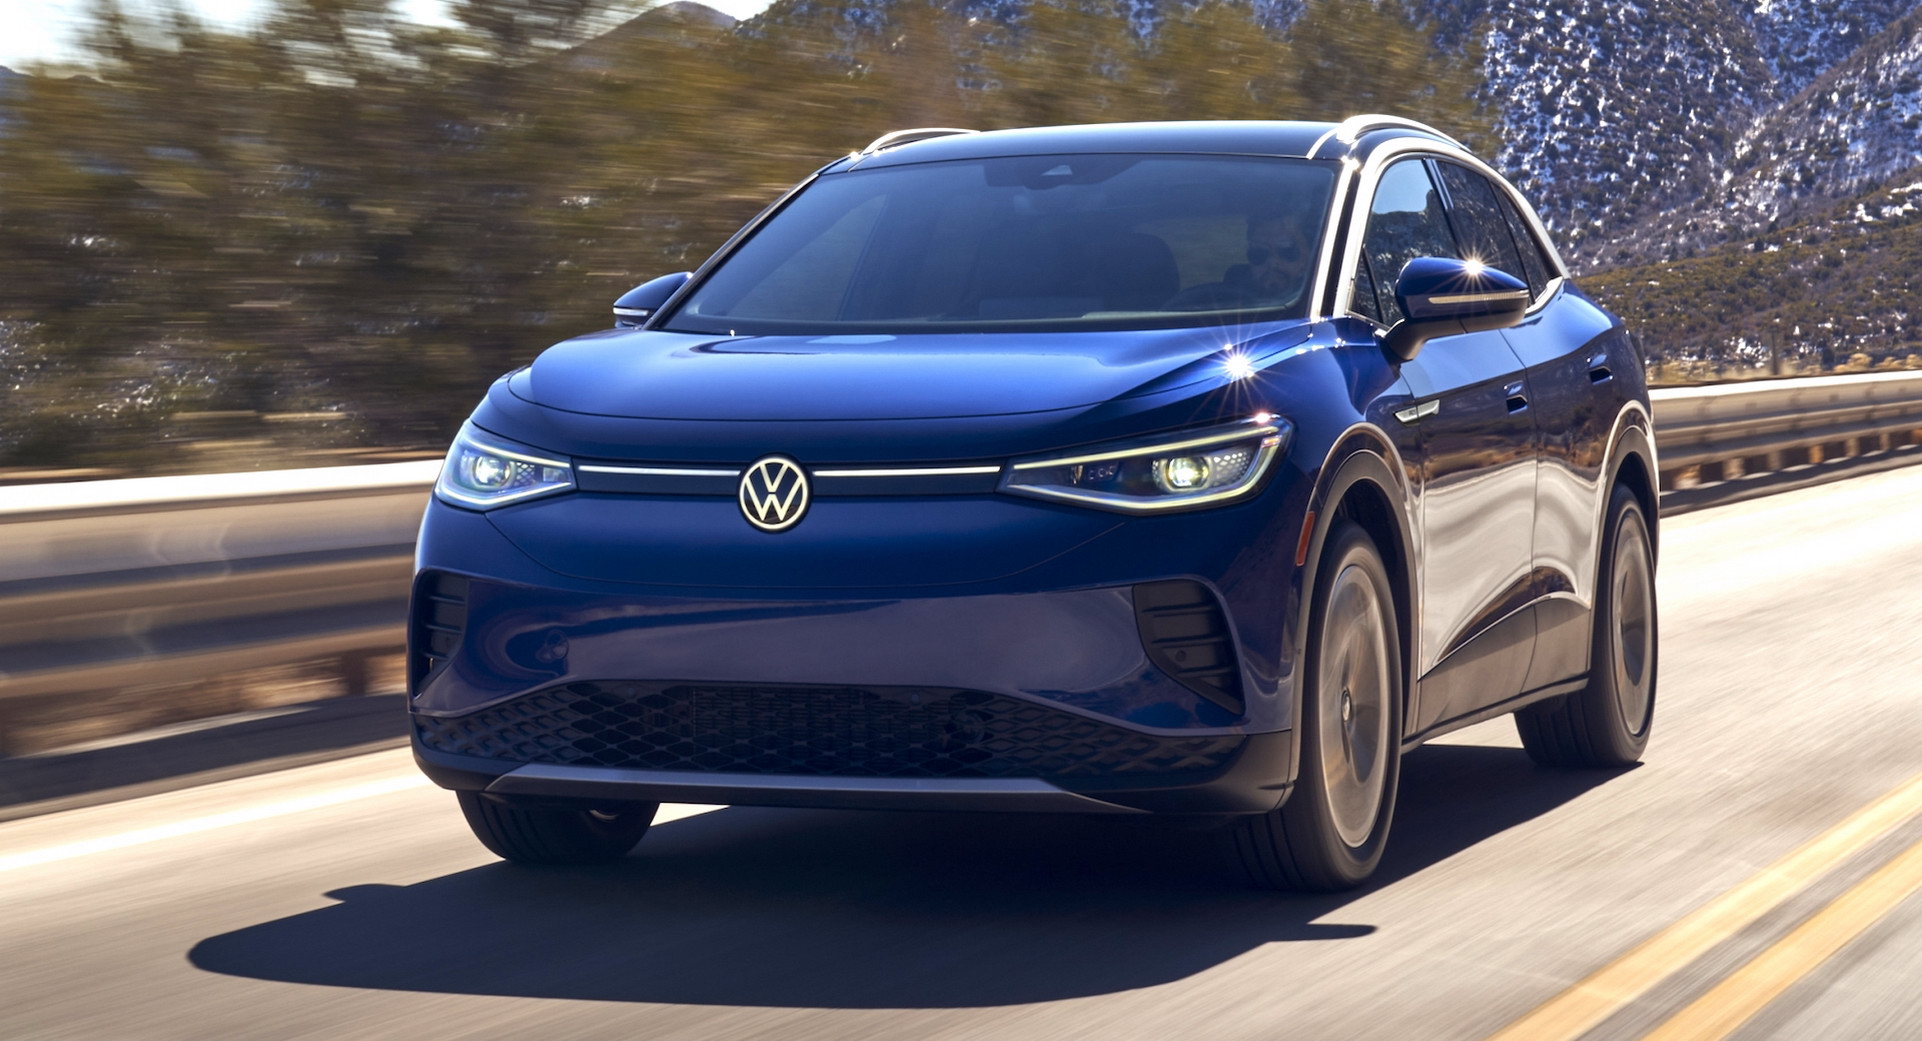 Pushed: VW ID.4 Is Right here To Give Tesla One thing To Assume About Auto Recent